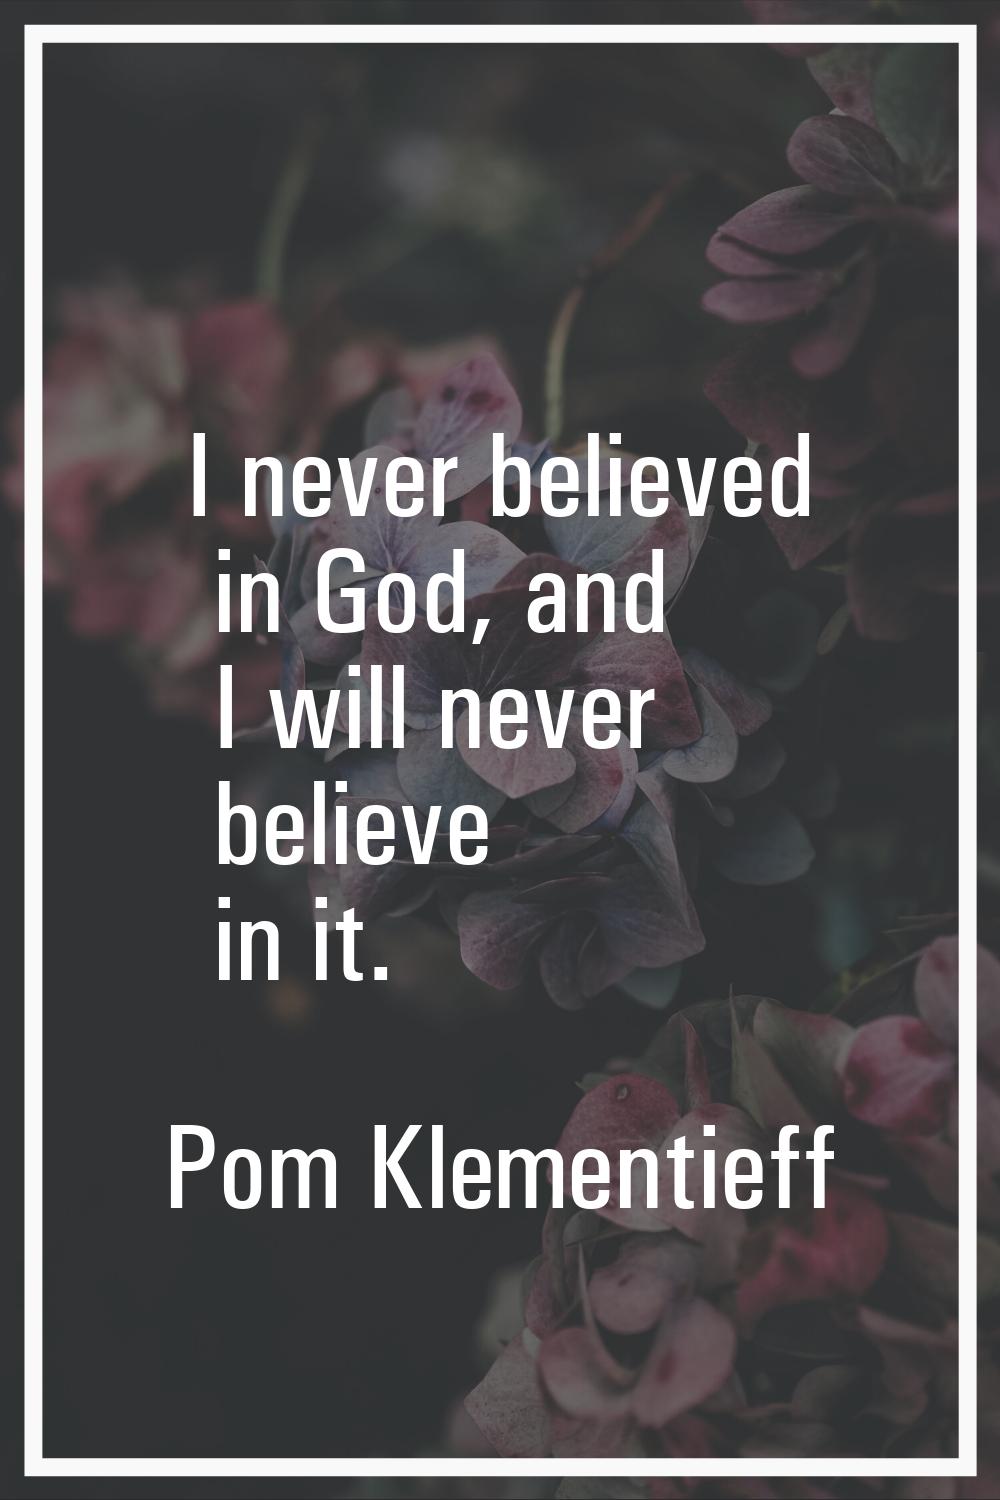 I never believed in God, and I will never believe in it.